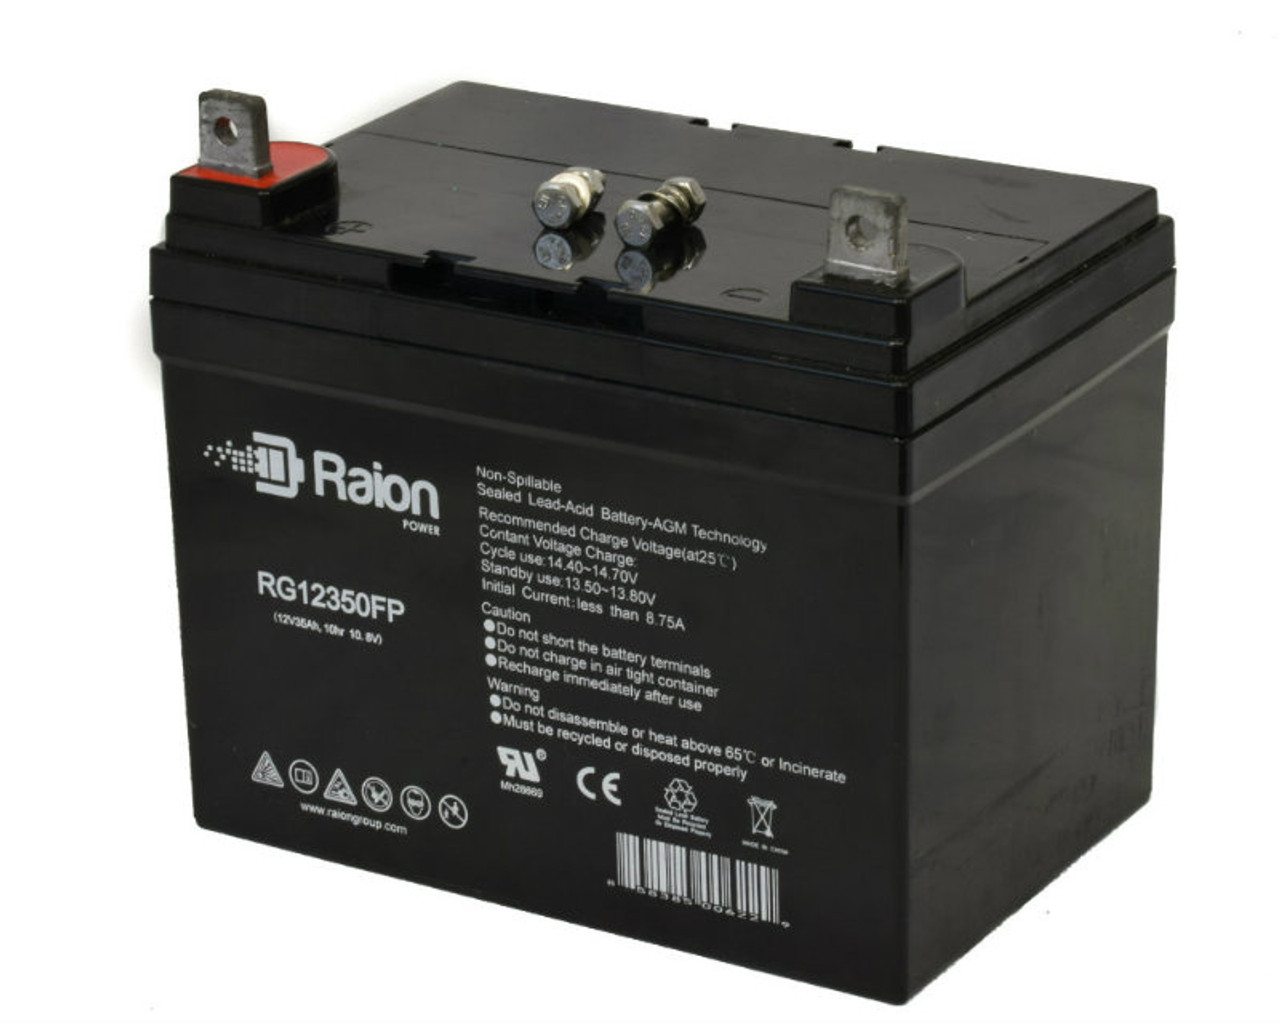 Raion Power Replacement 12V 35Ah Battery for Wilkov (Wisc. Engines) 2520 - 1 Pack